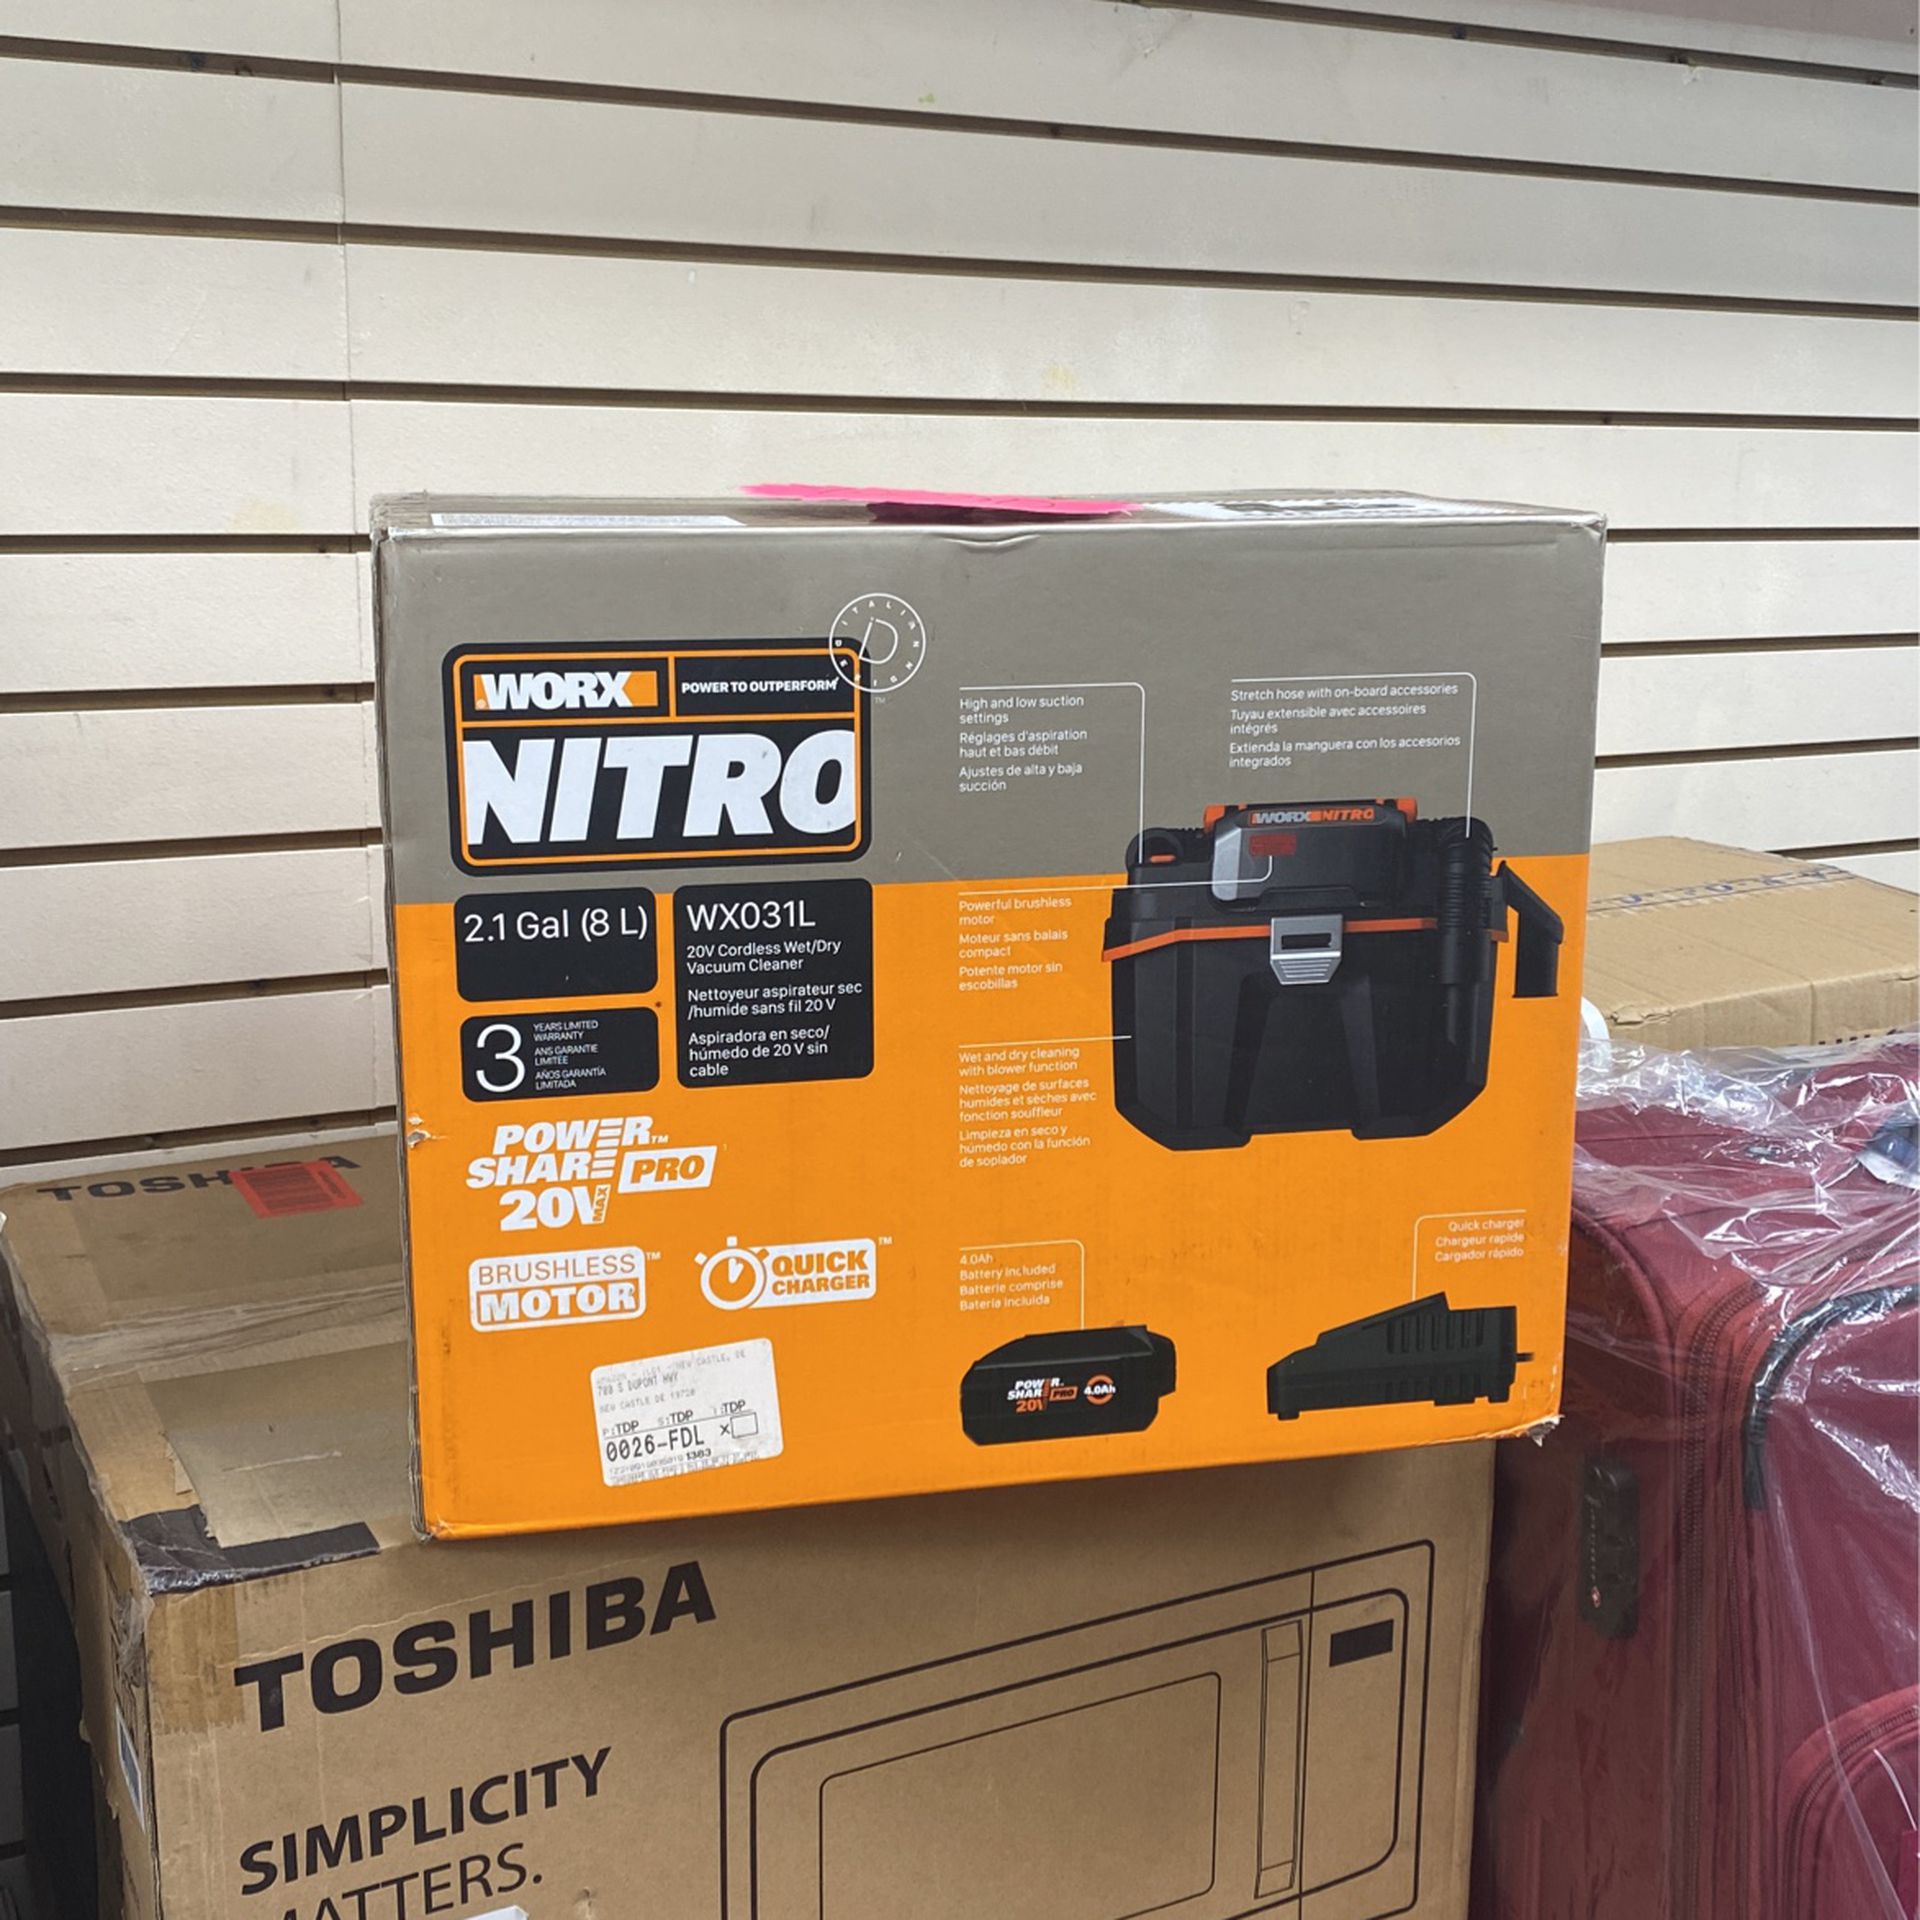 WORX Nitro WX031L 20V 2.1 Gal Cordless Wet/Dry Vacuum, Black for Sale in  North Plainfield, NJ OfferUp